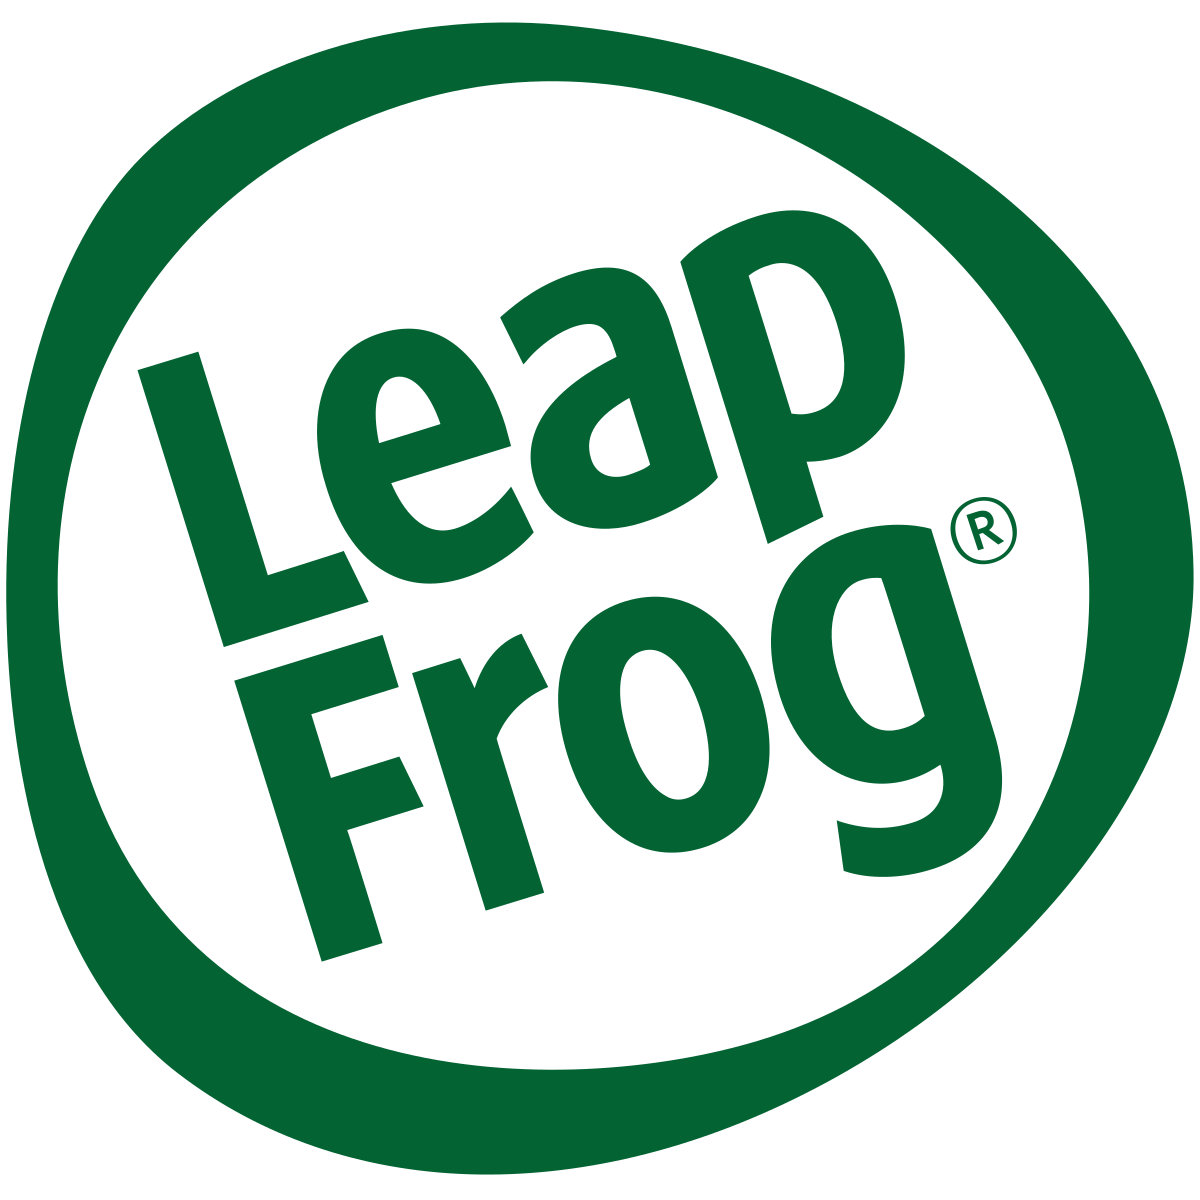 leap-frog